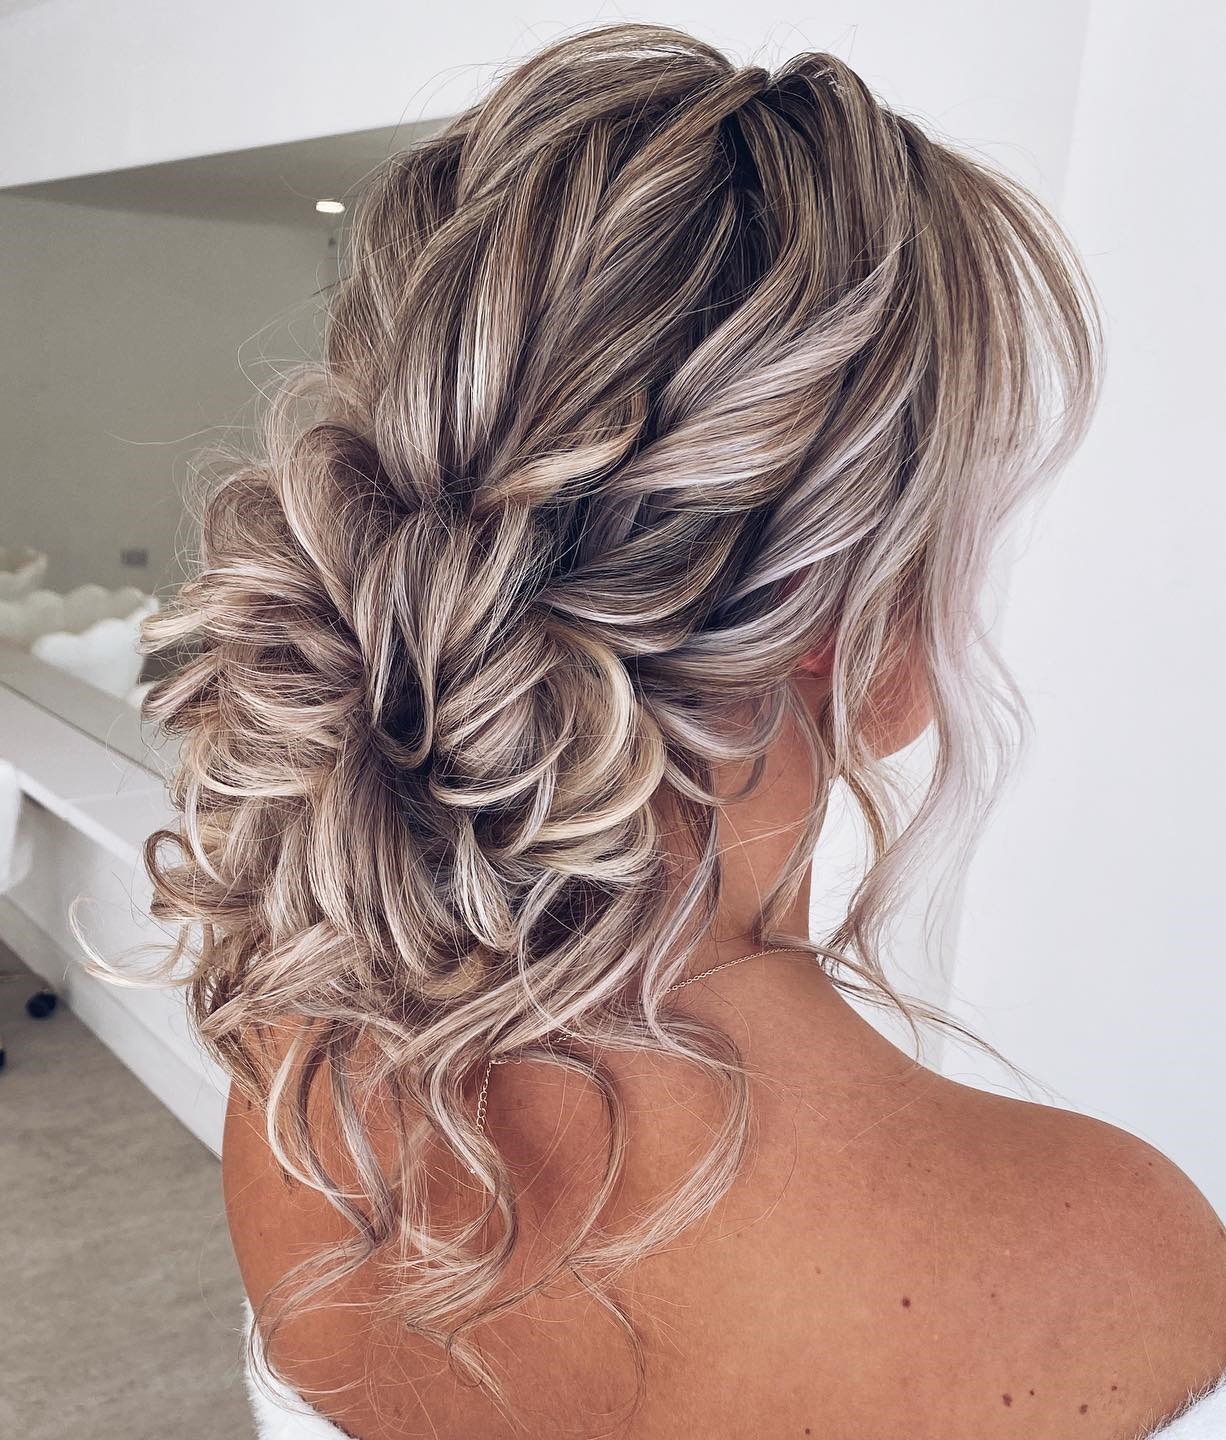 Quick Rolled Braid Updo For Shorter Hair - Wonder Forest